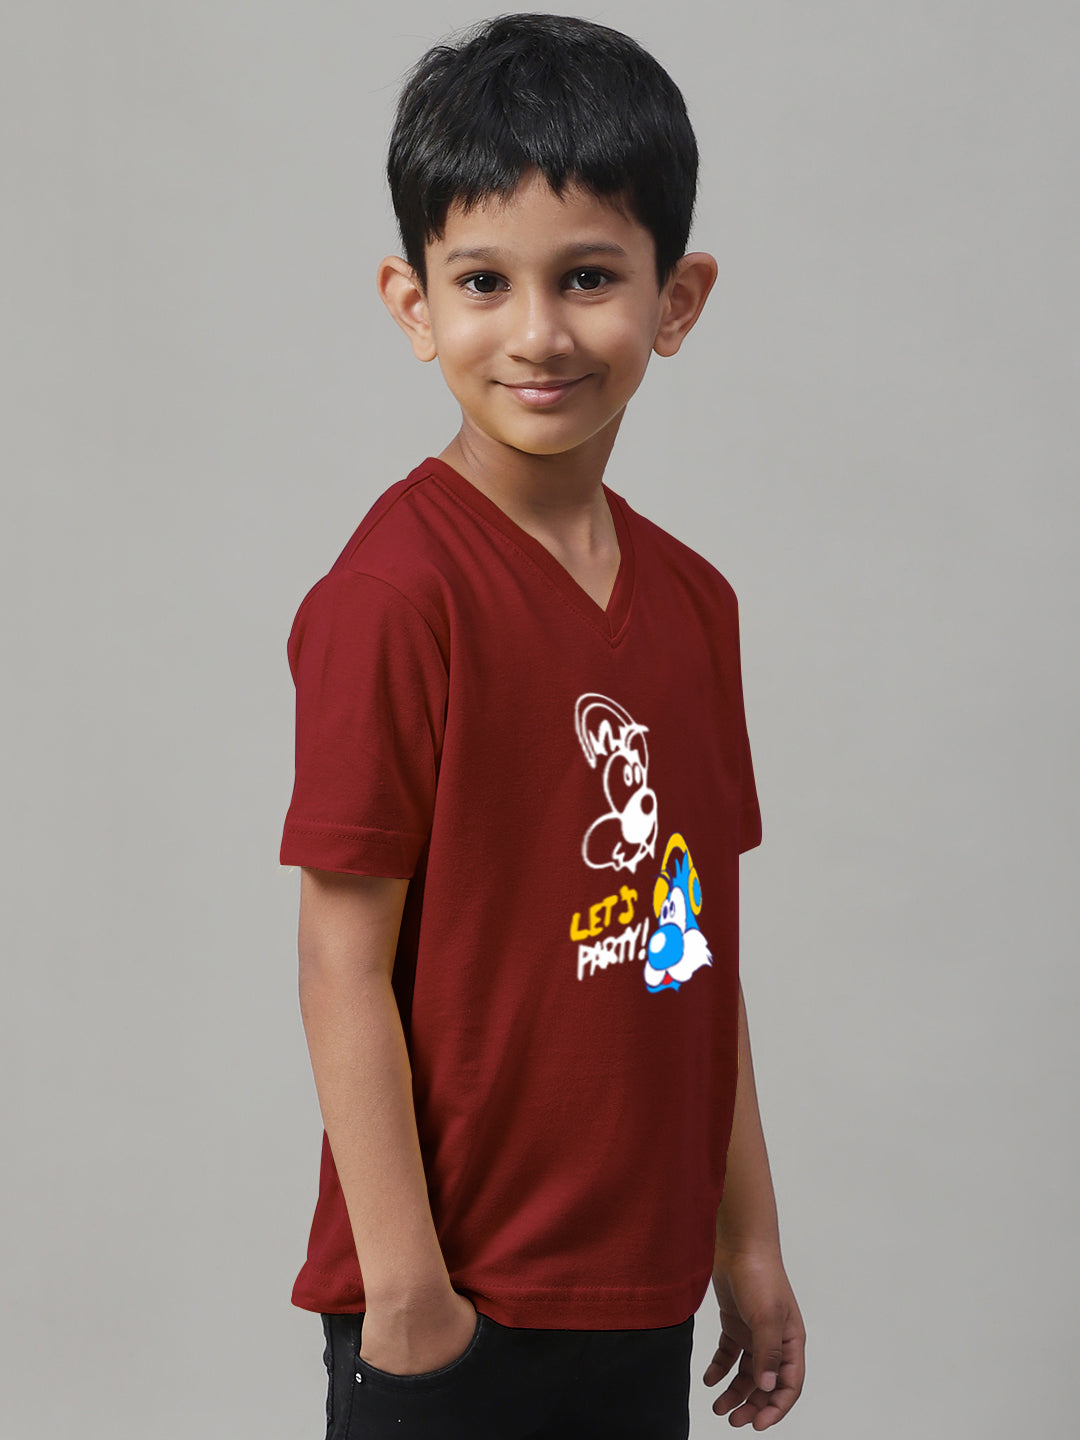 Boys Lets Party Half Sleeves Printed T-Shirt - Friskers